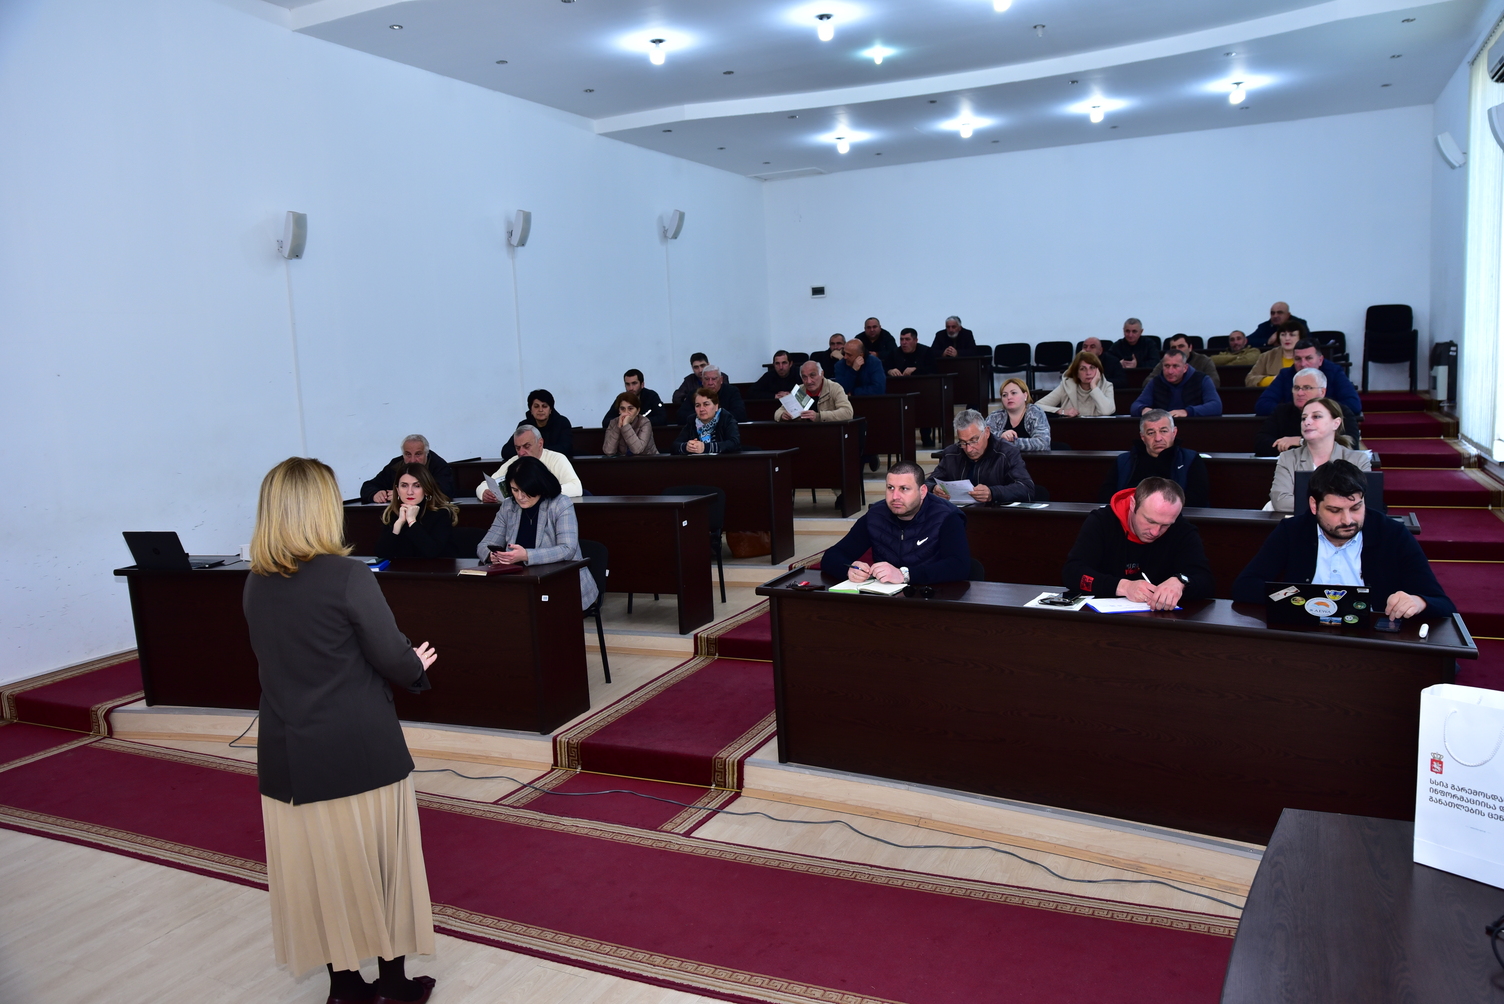 To get acquainted with the forest sector opportunities, informational meetings were held in the Guria region